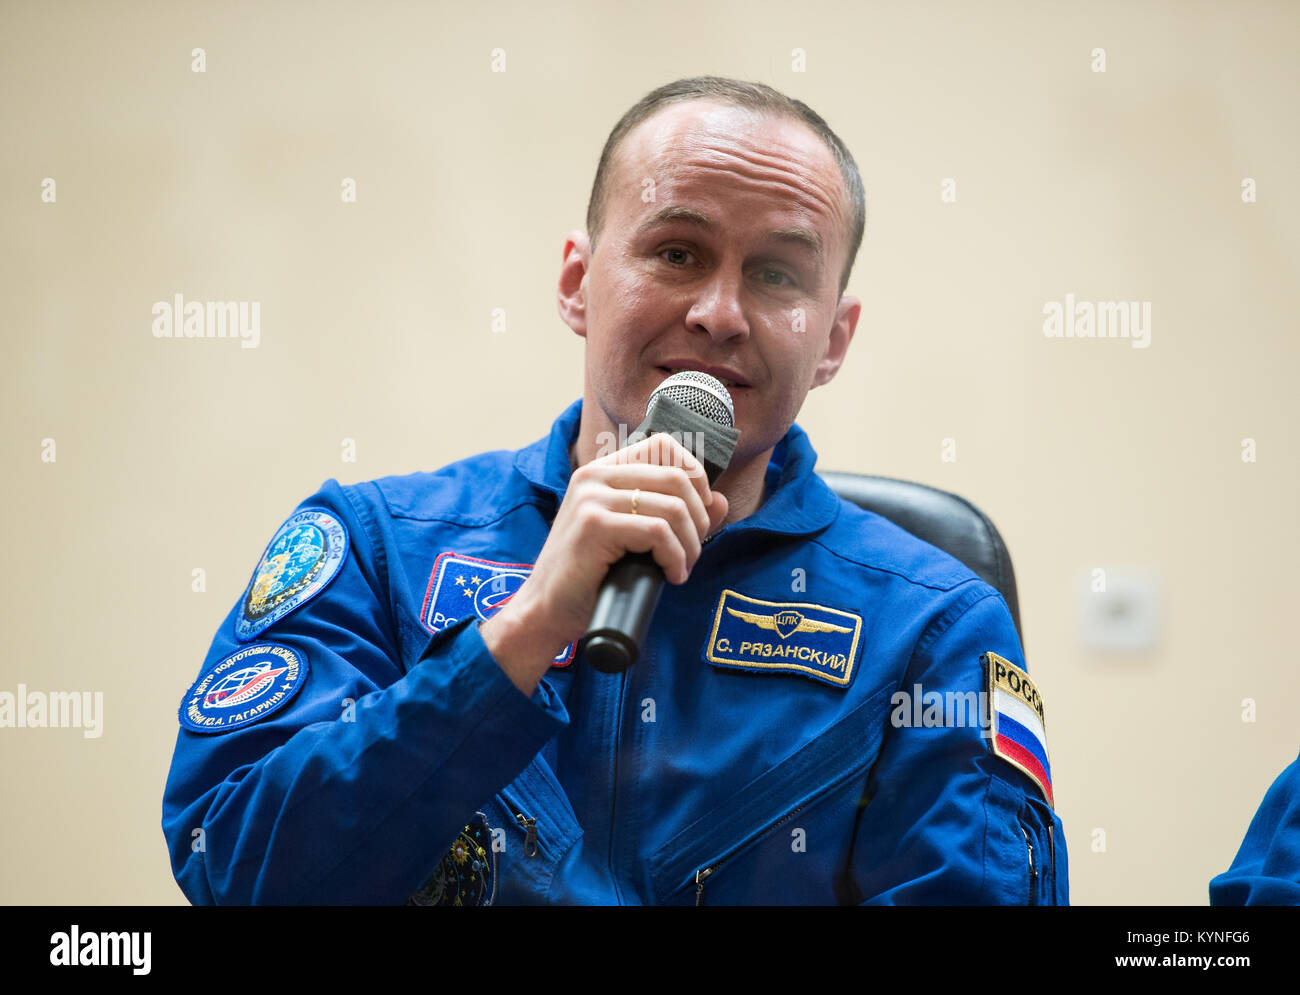 Expedition 51 backup crew member, Sergey Ryazanskiy of Roscosmos answers a question during a press conference on Wednesday, April 19, 2017 at the Cosmonaut Hotel in Baikonur, Kazakhstan. Launch of the Soyuz rocket is scheduled for April 20 and will carry Expedition 51 prime crew members Soyuz Commander Fyodor Yurchikhin of Roscosmos and Flight Engineer Jack Fischer of NASA, into orbit to begin their four and a half month mission on the International Space Station. Photo Credit: (NASA/Aubrey Gemignani) Stock Photo